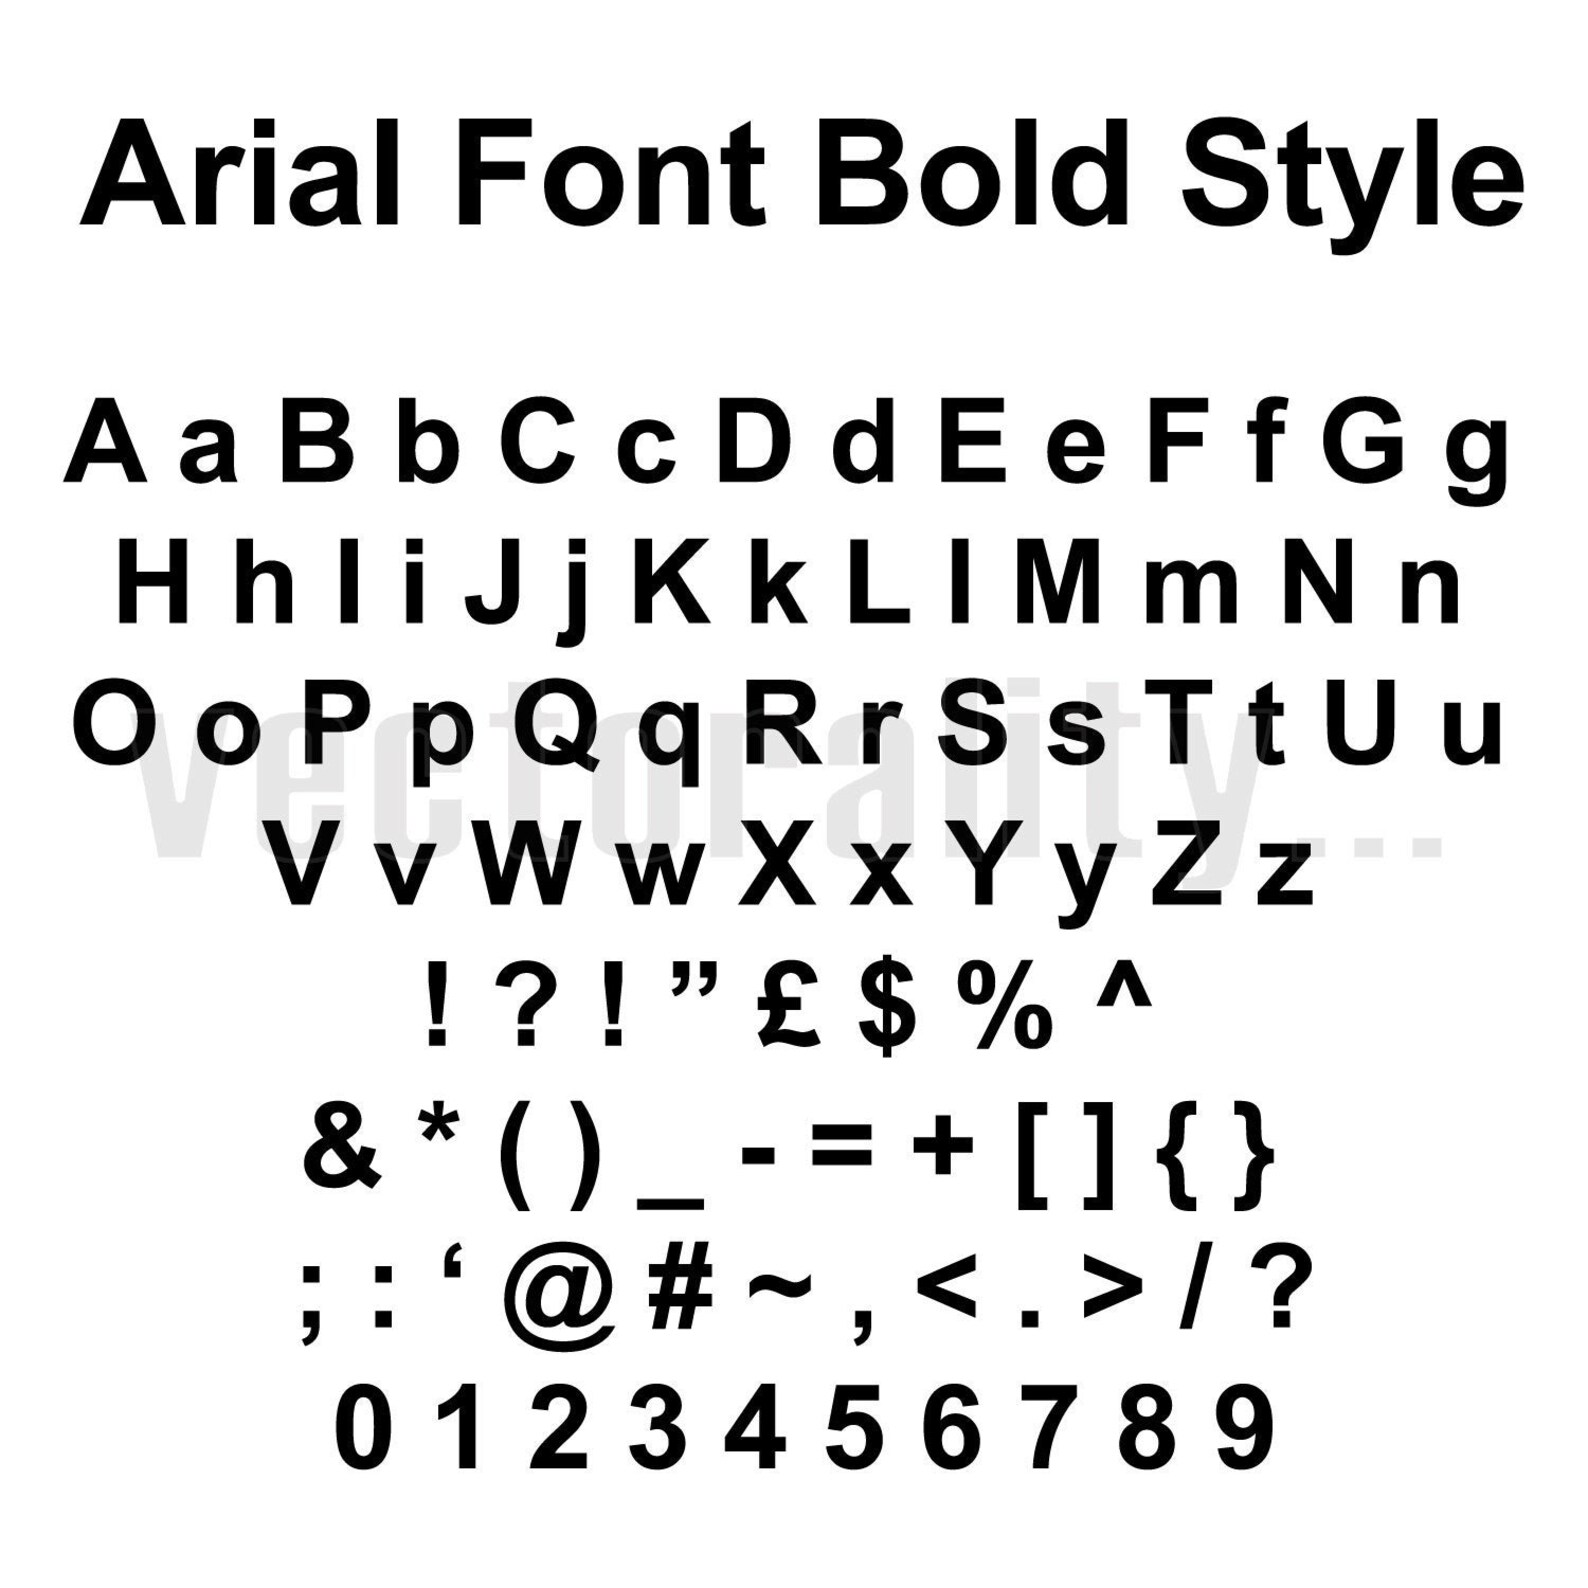 Шрифт arial bold. Arial шрифт. Шрифт arial Regular. Шрифт arial rounded. Полужирный шрифт arial.